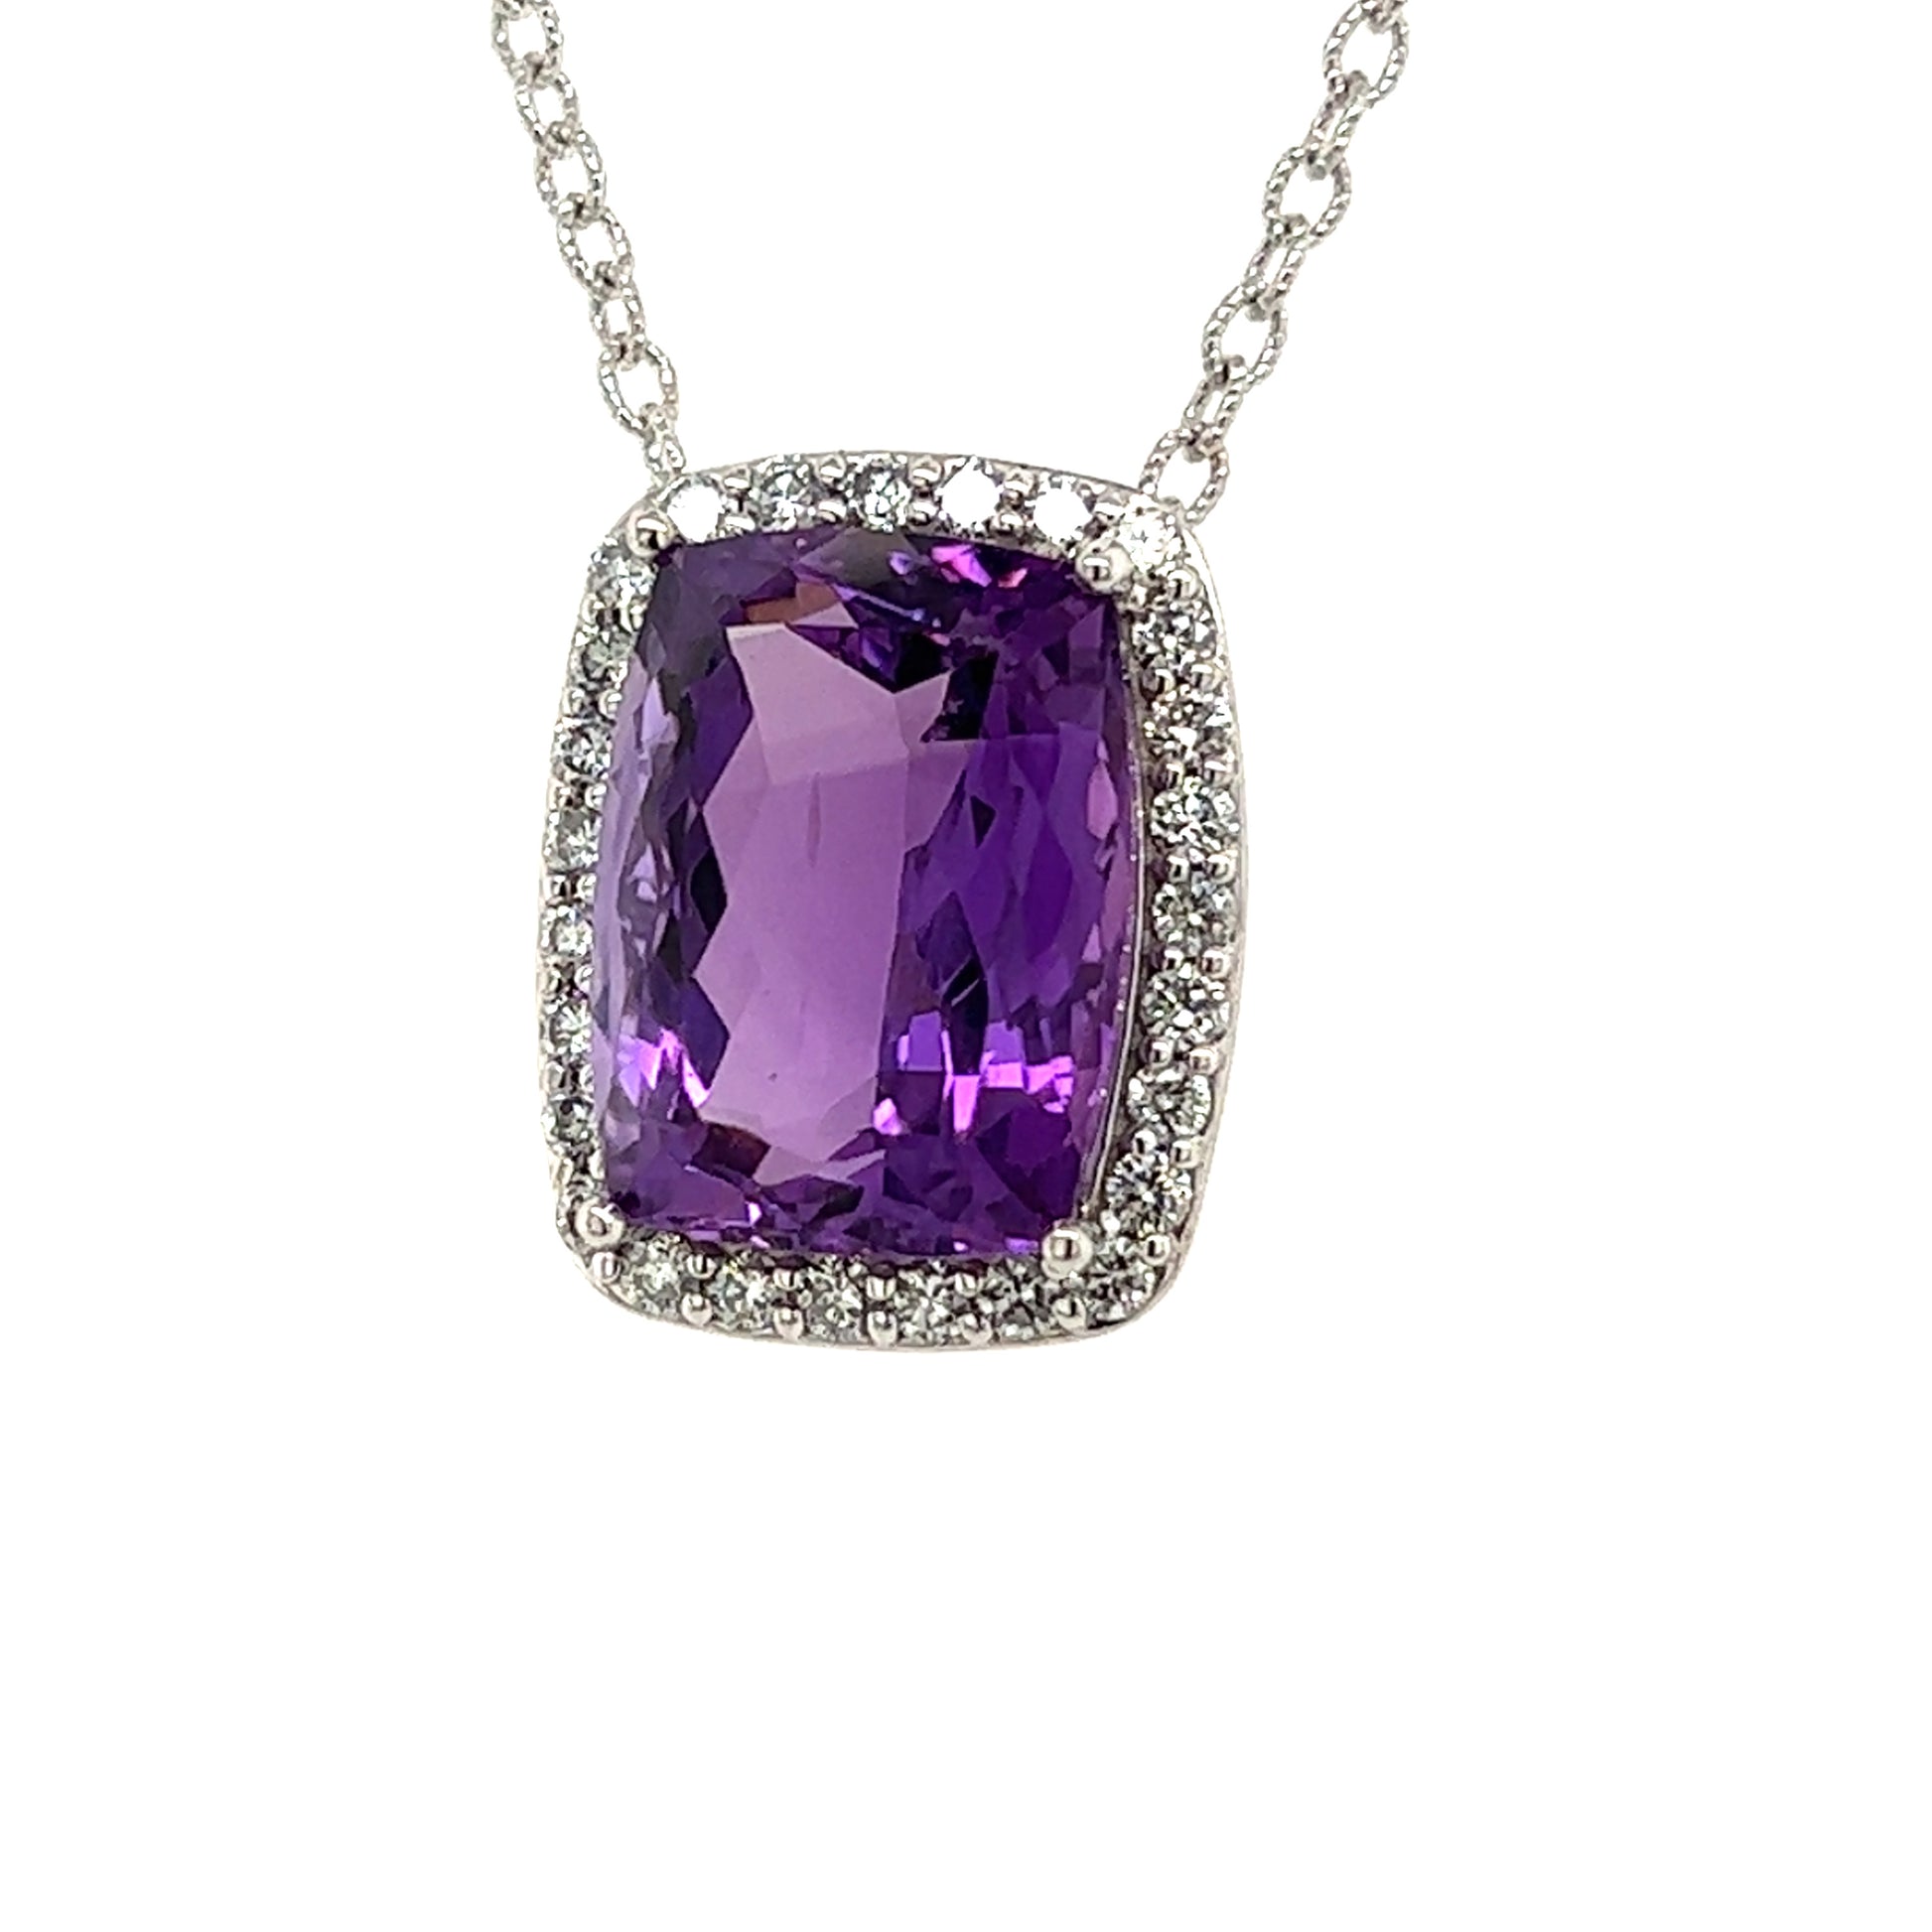 Natural Amethyst Diamond Necklace 14k Gold 14.73 TCW Certified $5,550 215436